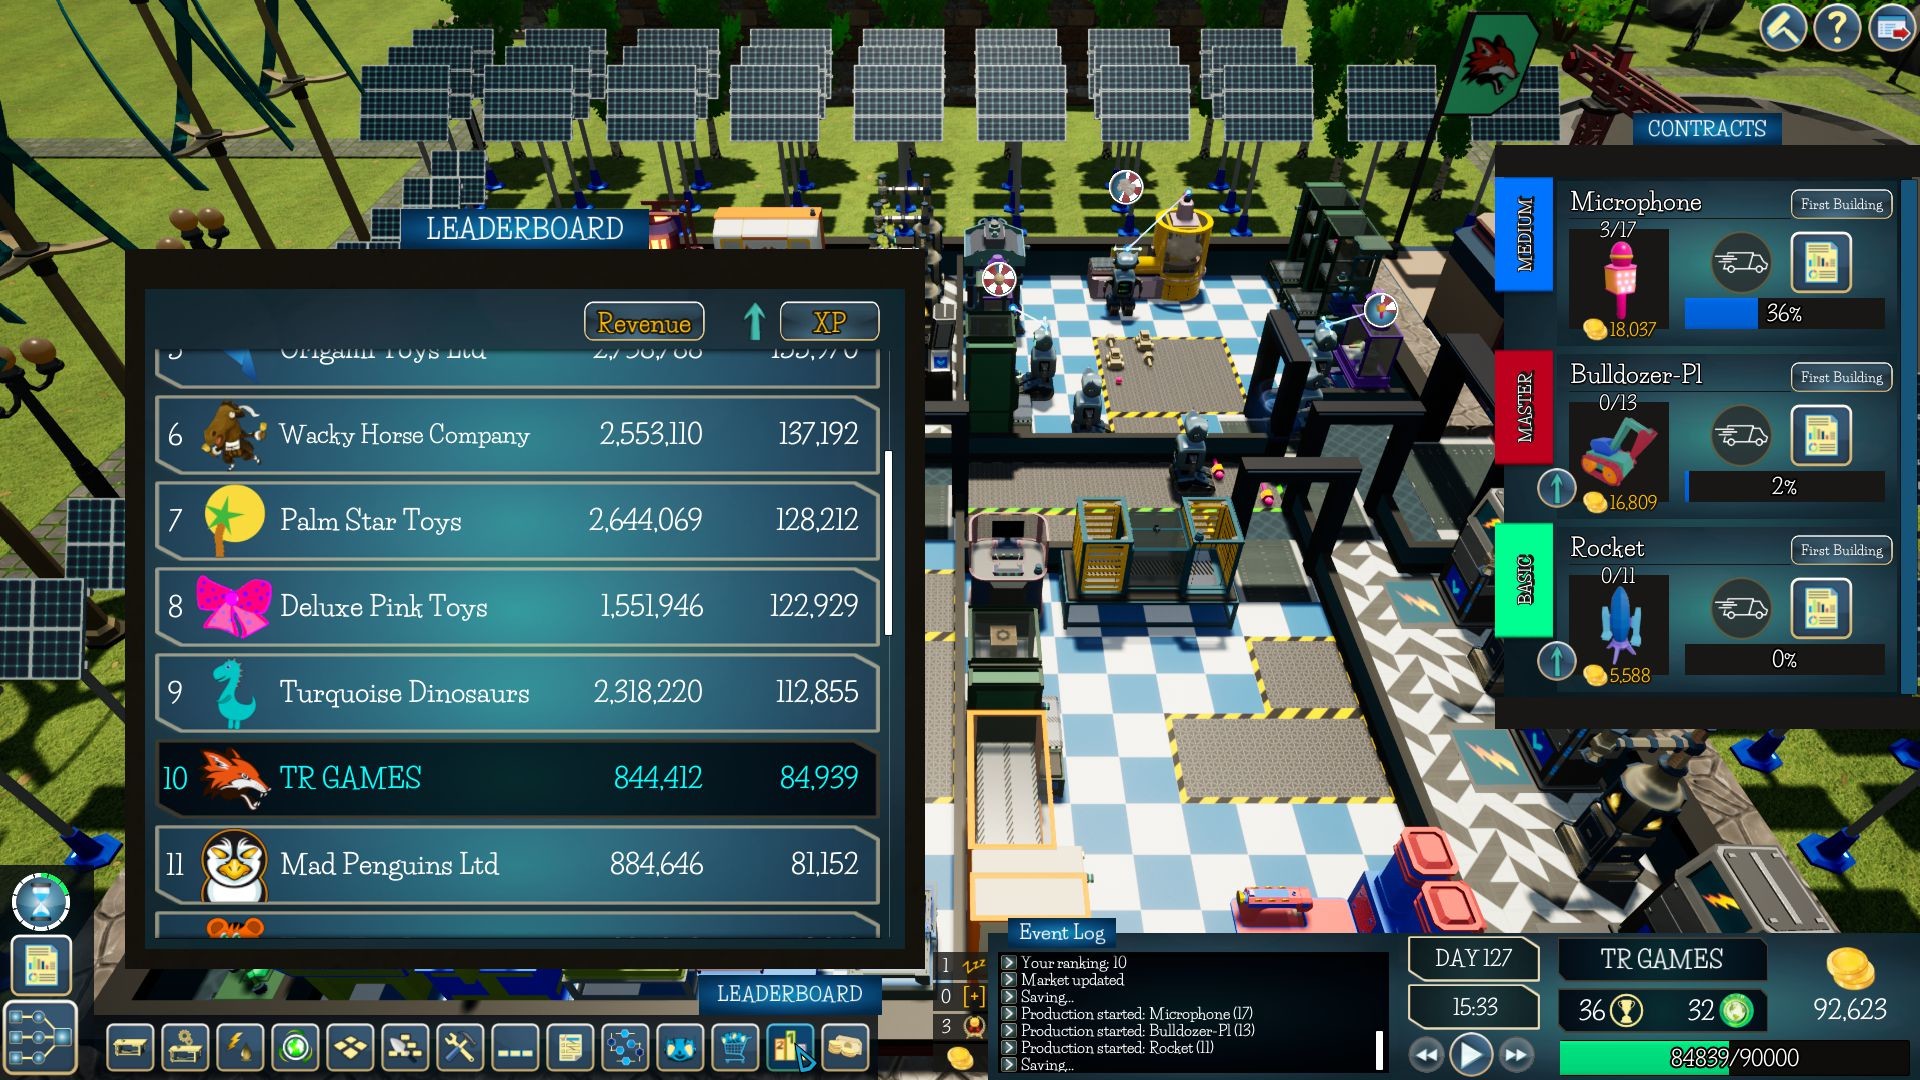 Save 90% on Smart Factory Tycoon on Steam